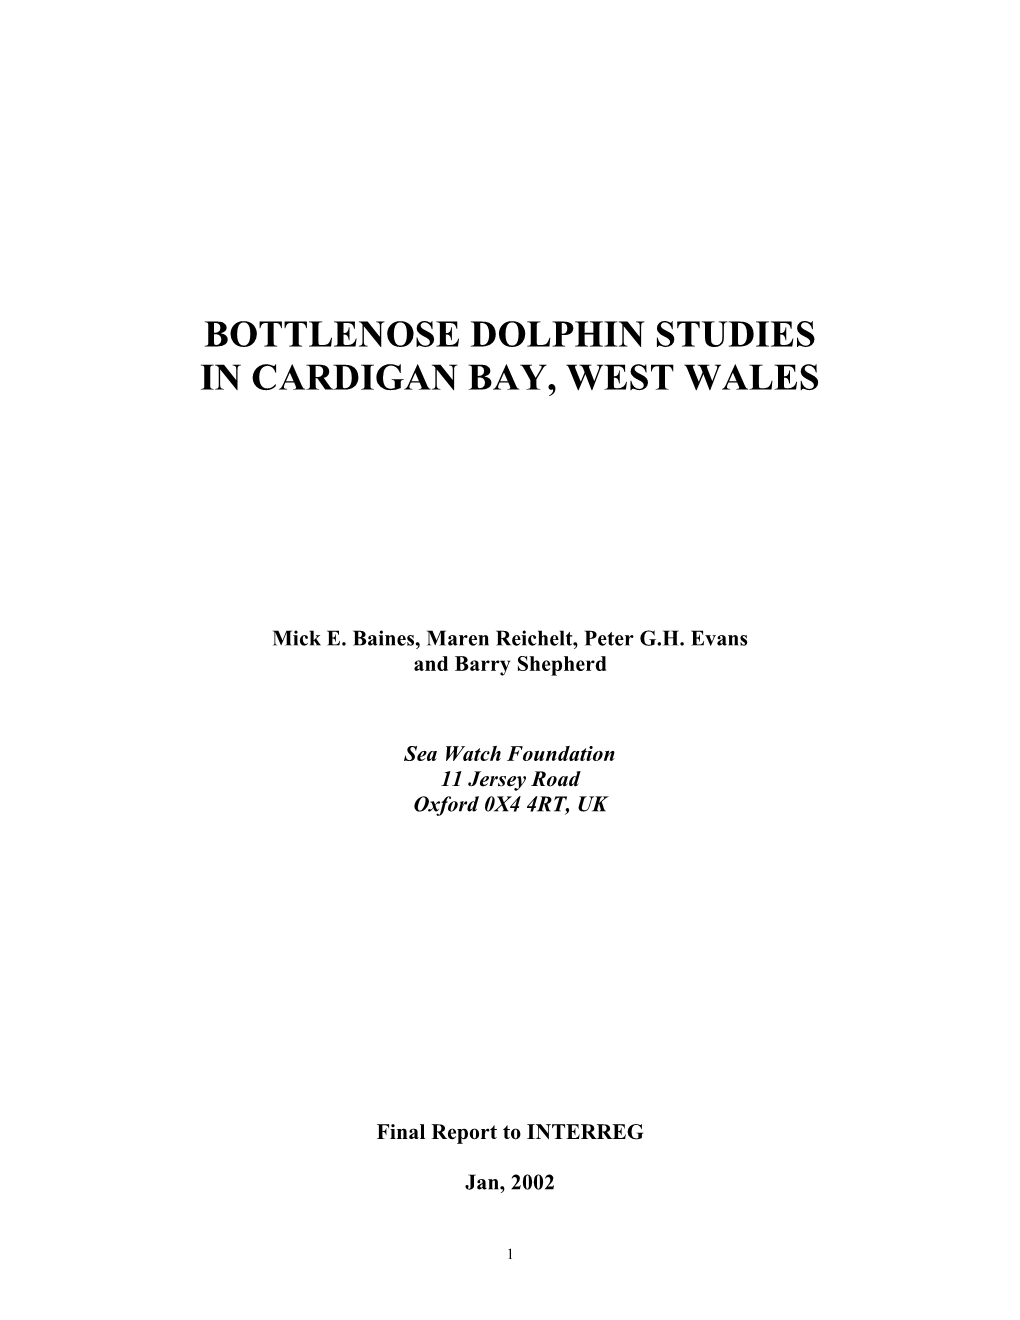 Bottlenose Dolphin Studies in Cardigan Bay, West Wales